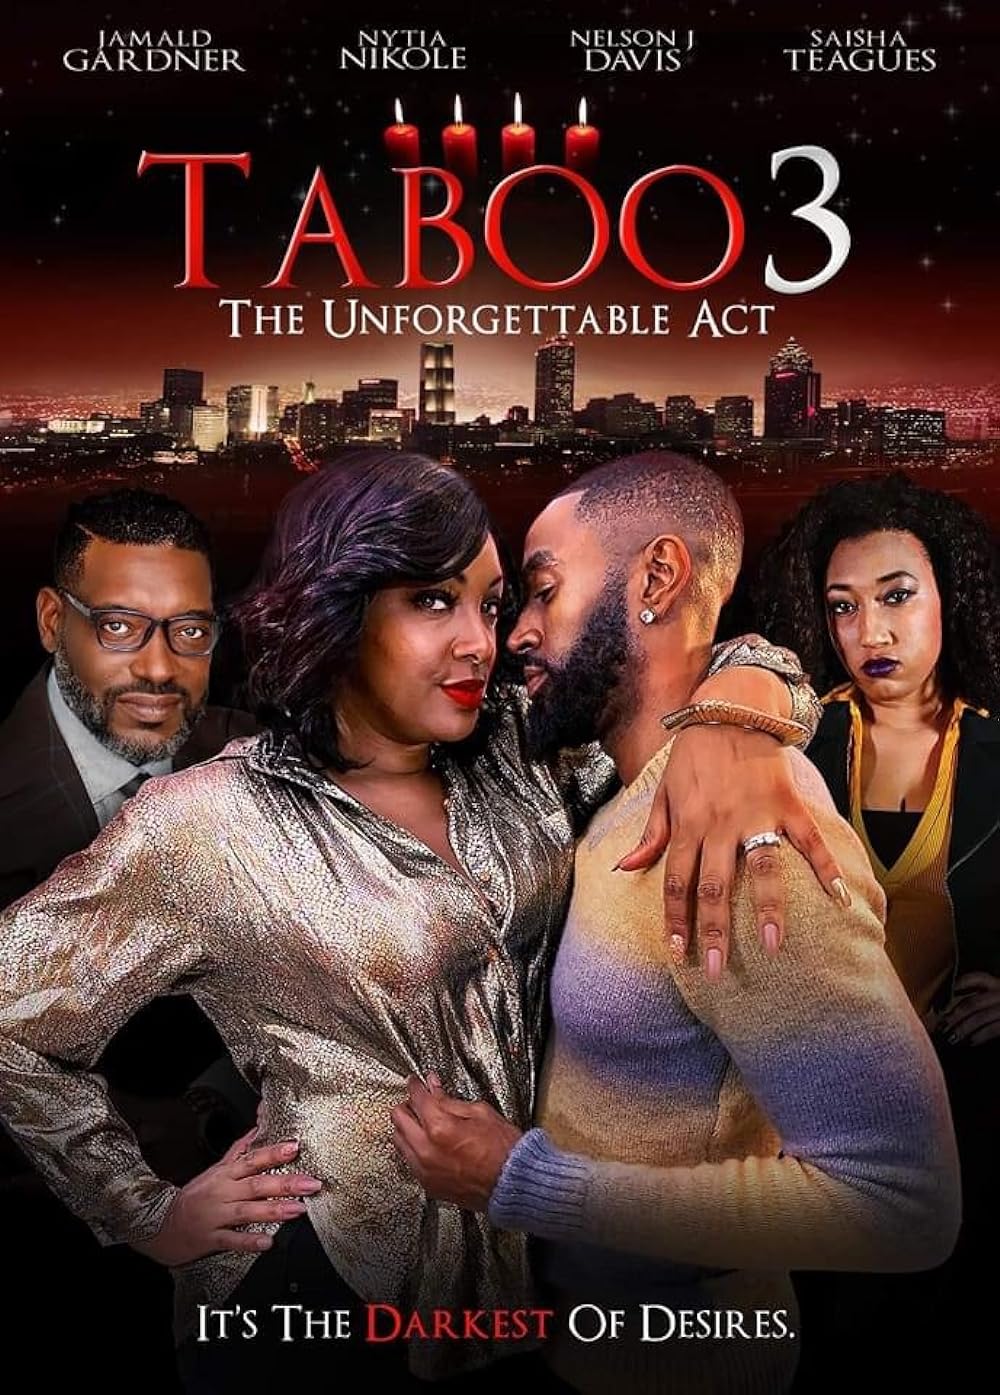 chase julian recommends taboo family full movie pic